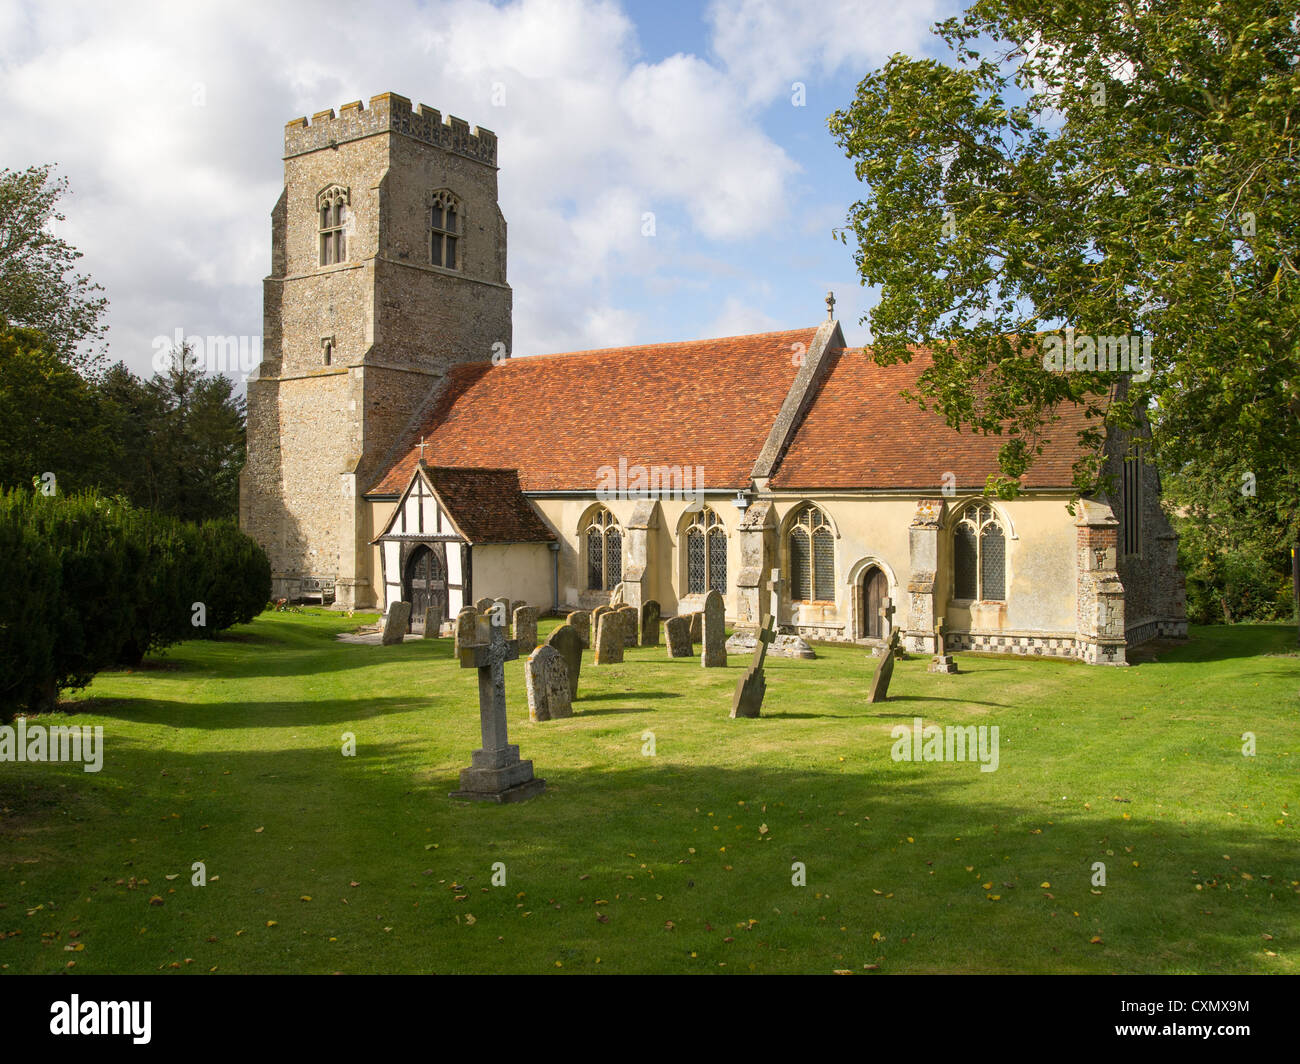 The old church of St Peter and St Paul at Alpheton, Suffolk, pictured in its rural country setting, with graveyard. Stock Photo